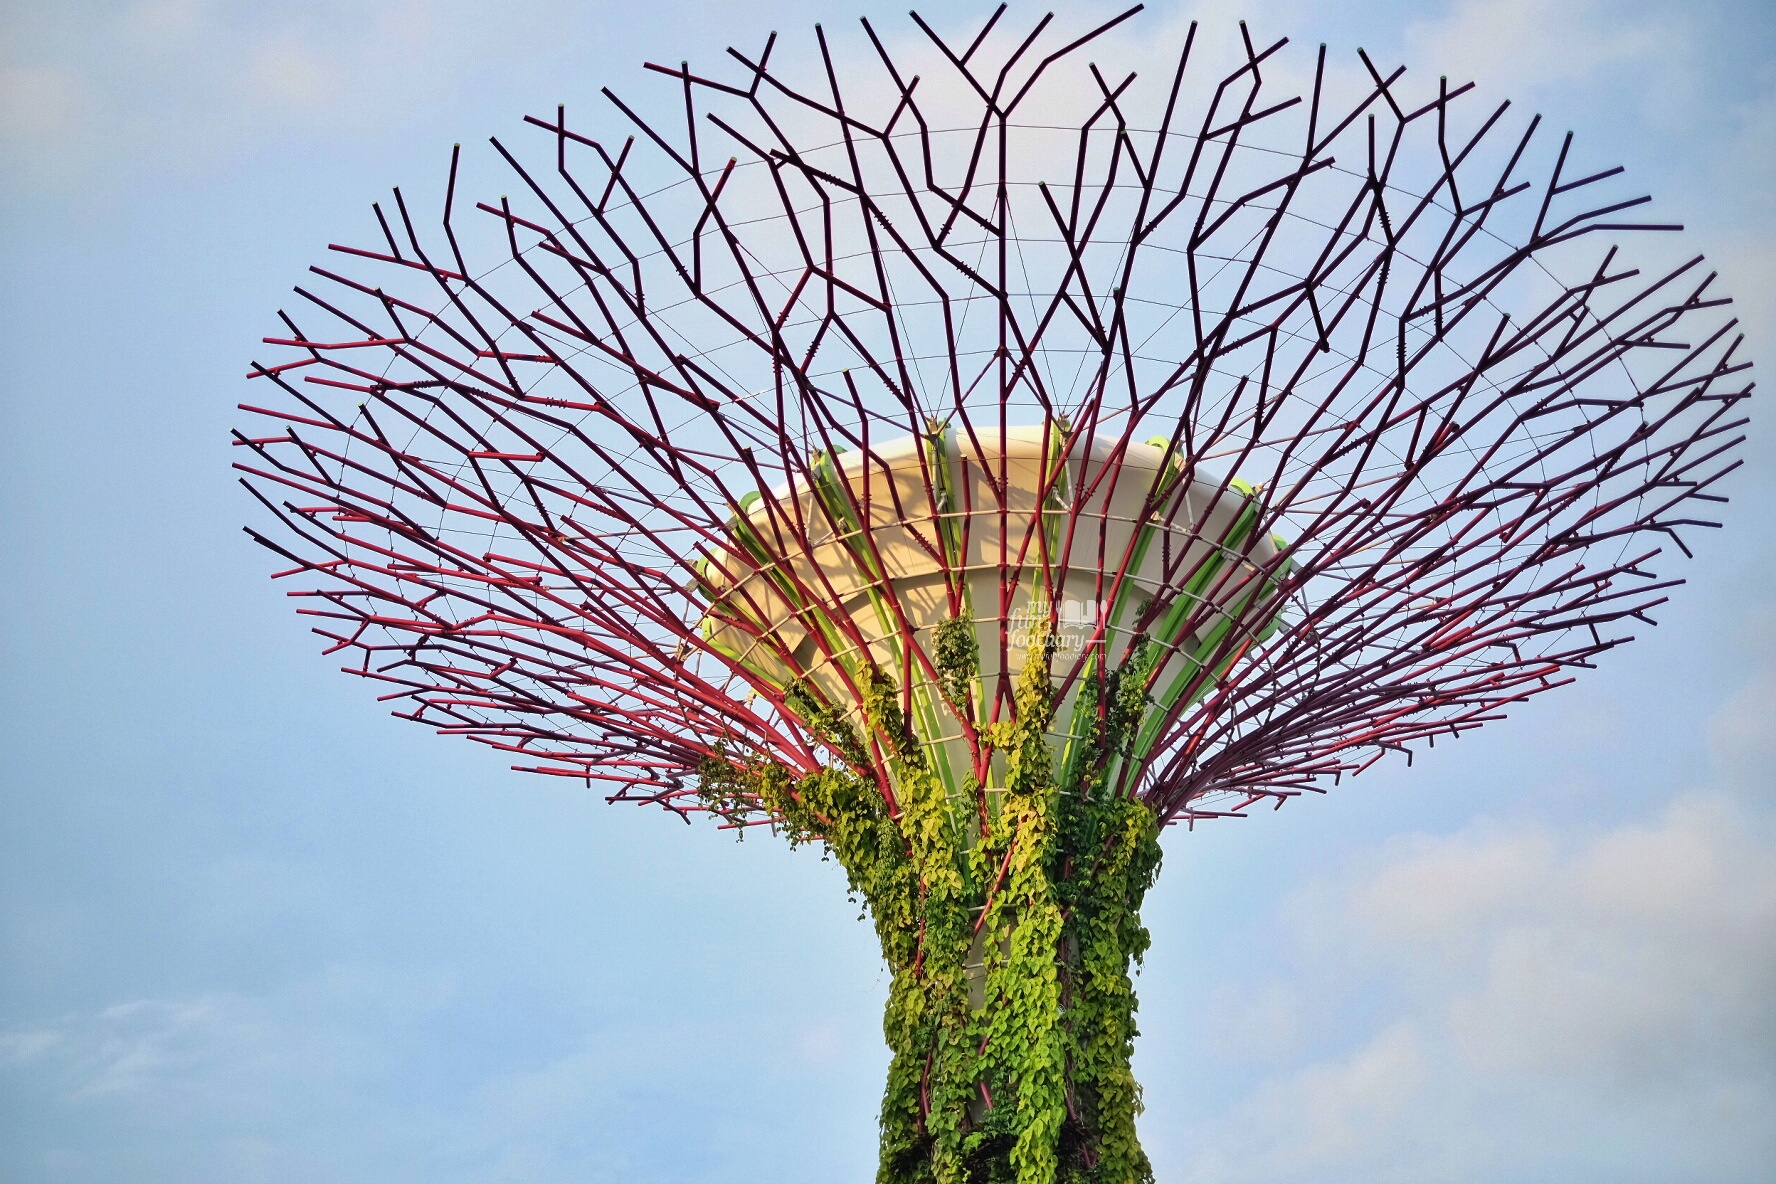 The Superdome Tree at Gardens By The Bay by Myfunfoodiary